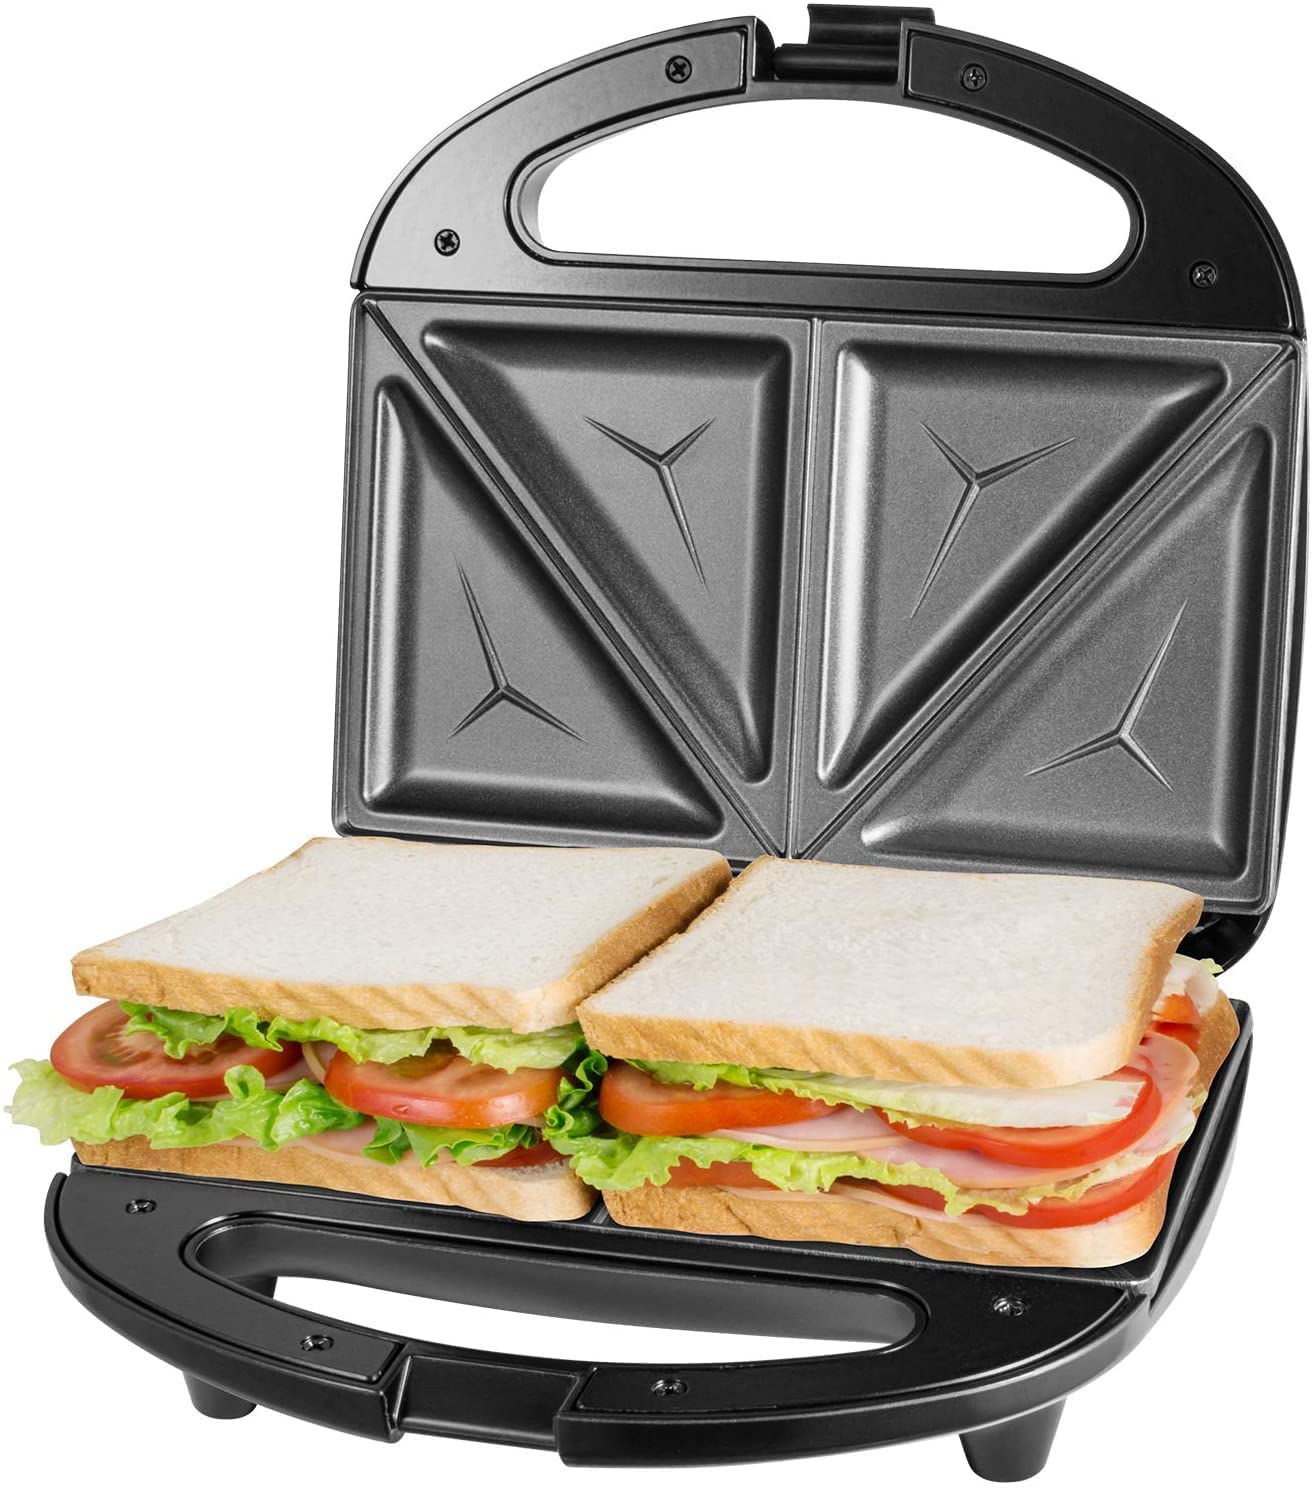 DIDO Sandwich Maker for 2 Sandwiches, Sandwich Toaster, 2-Layer Non-Stick Coating, Quick Heating Toaster, Heat-Insulated Handle, Space-Saving Storage, Black/Stainless Steel